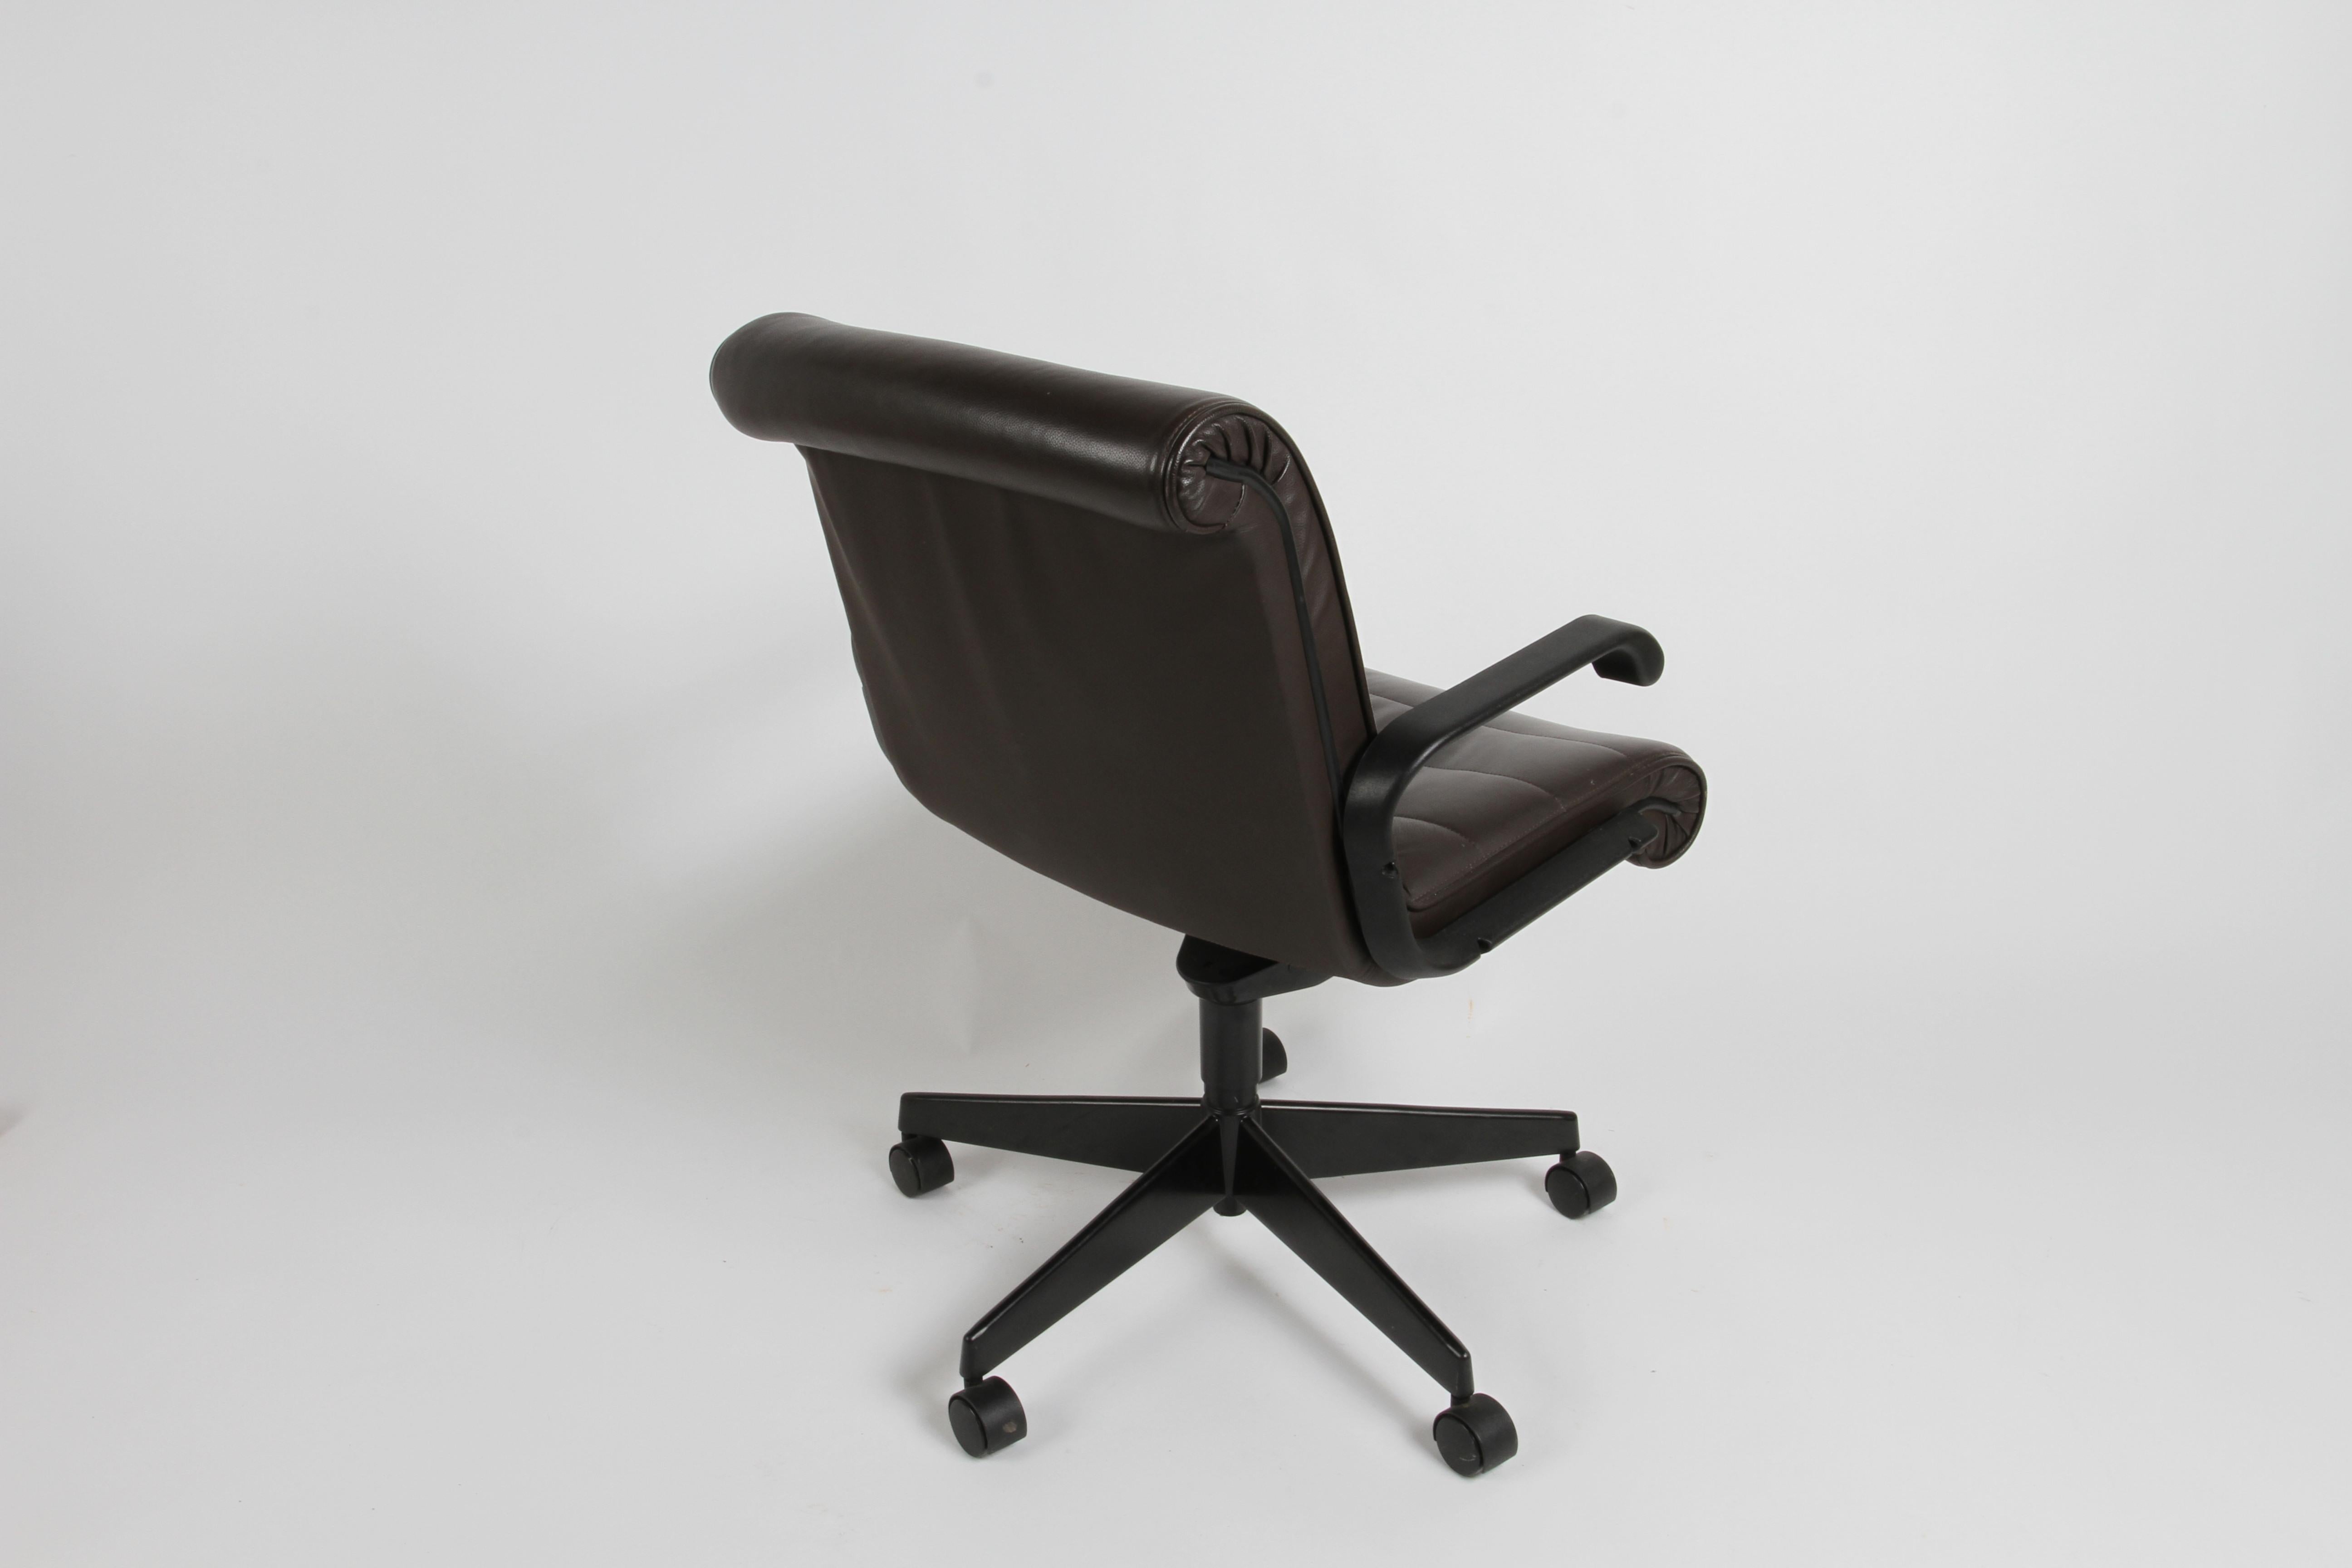 Steel Richard Sapper for Knoll Desk Task Executive or Conference Chair - Brown Leather For Sale